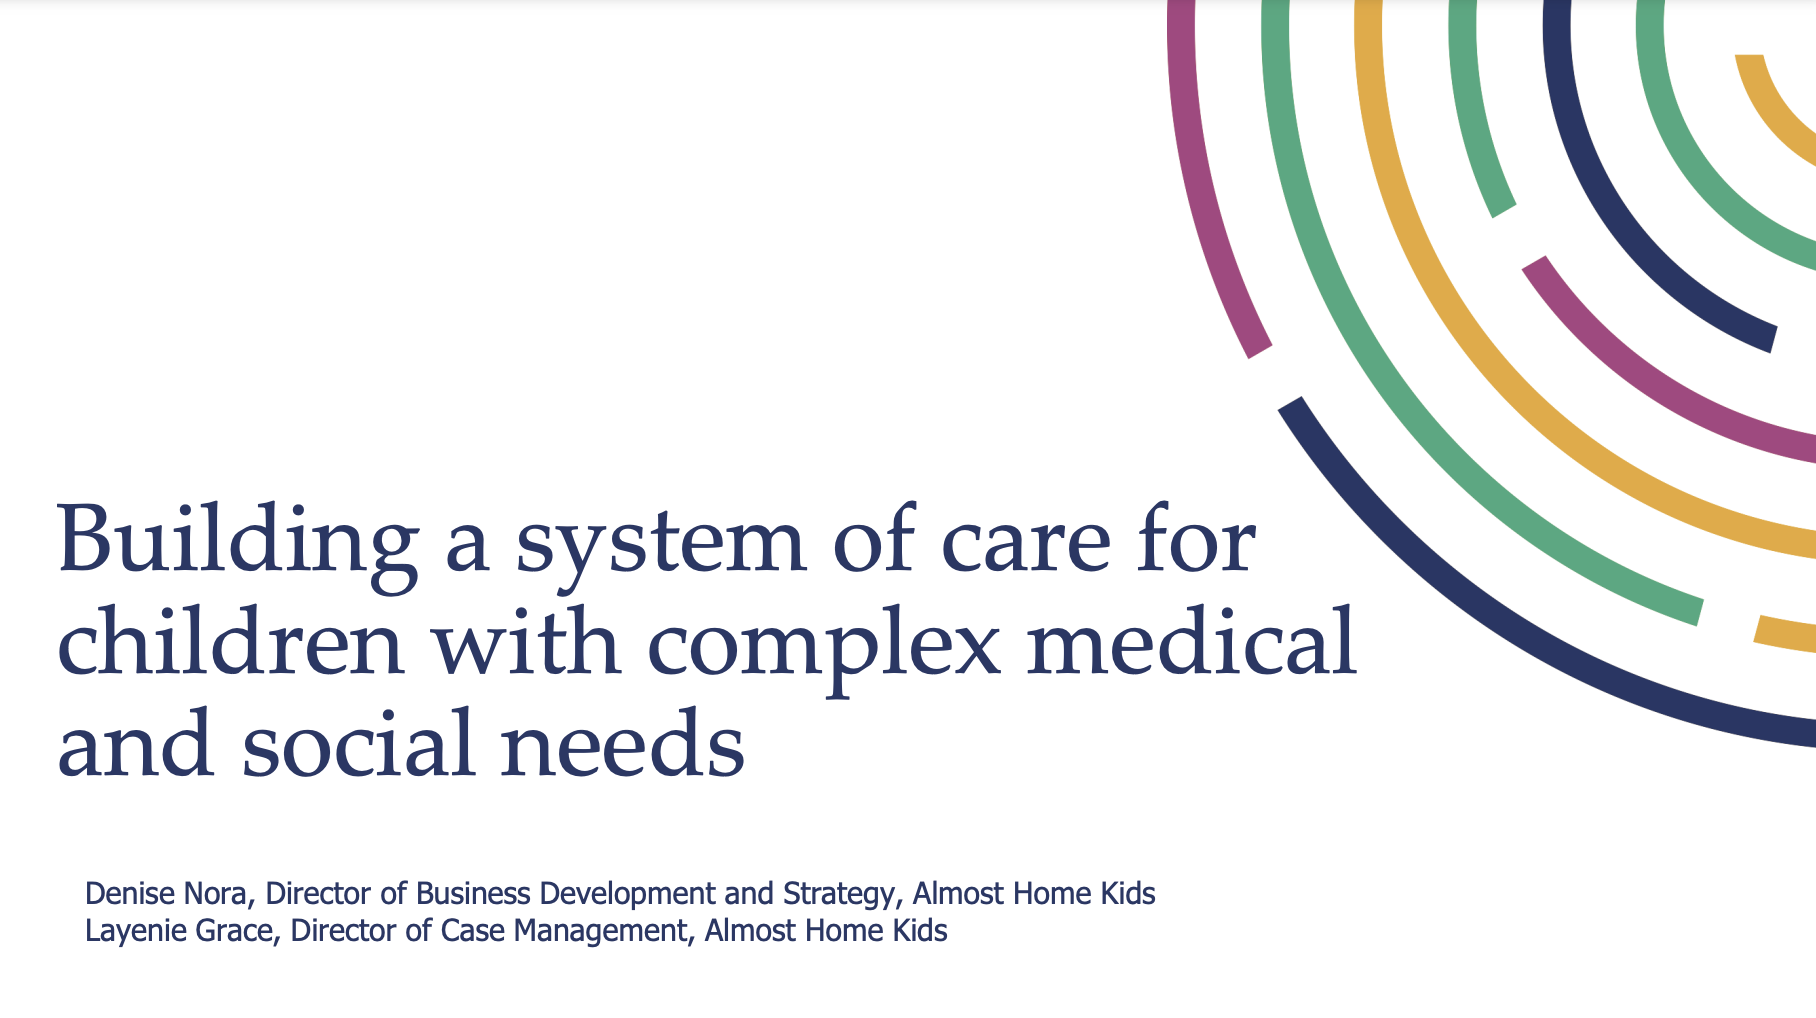 Building a System of Care for Children with Complex Medical and Social Needs